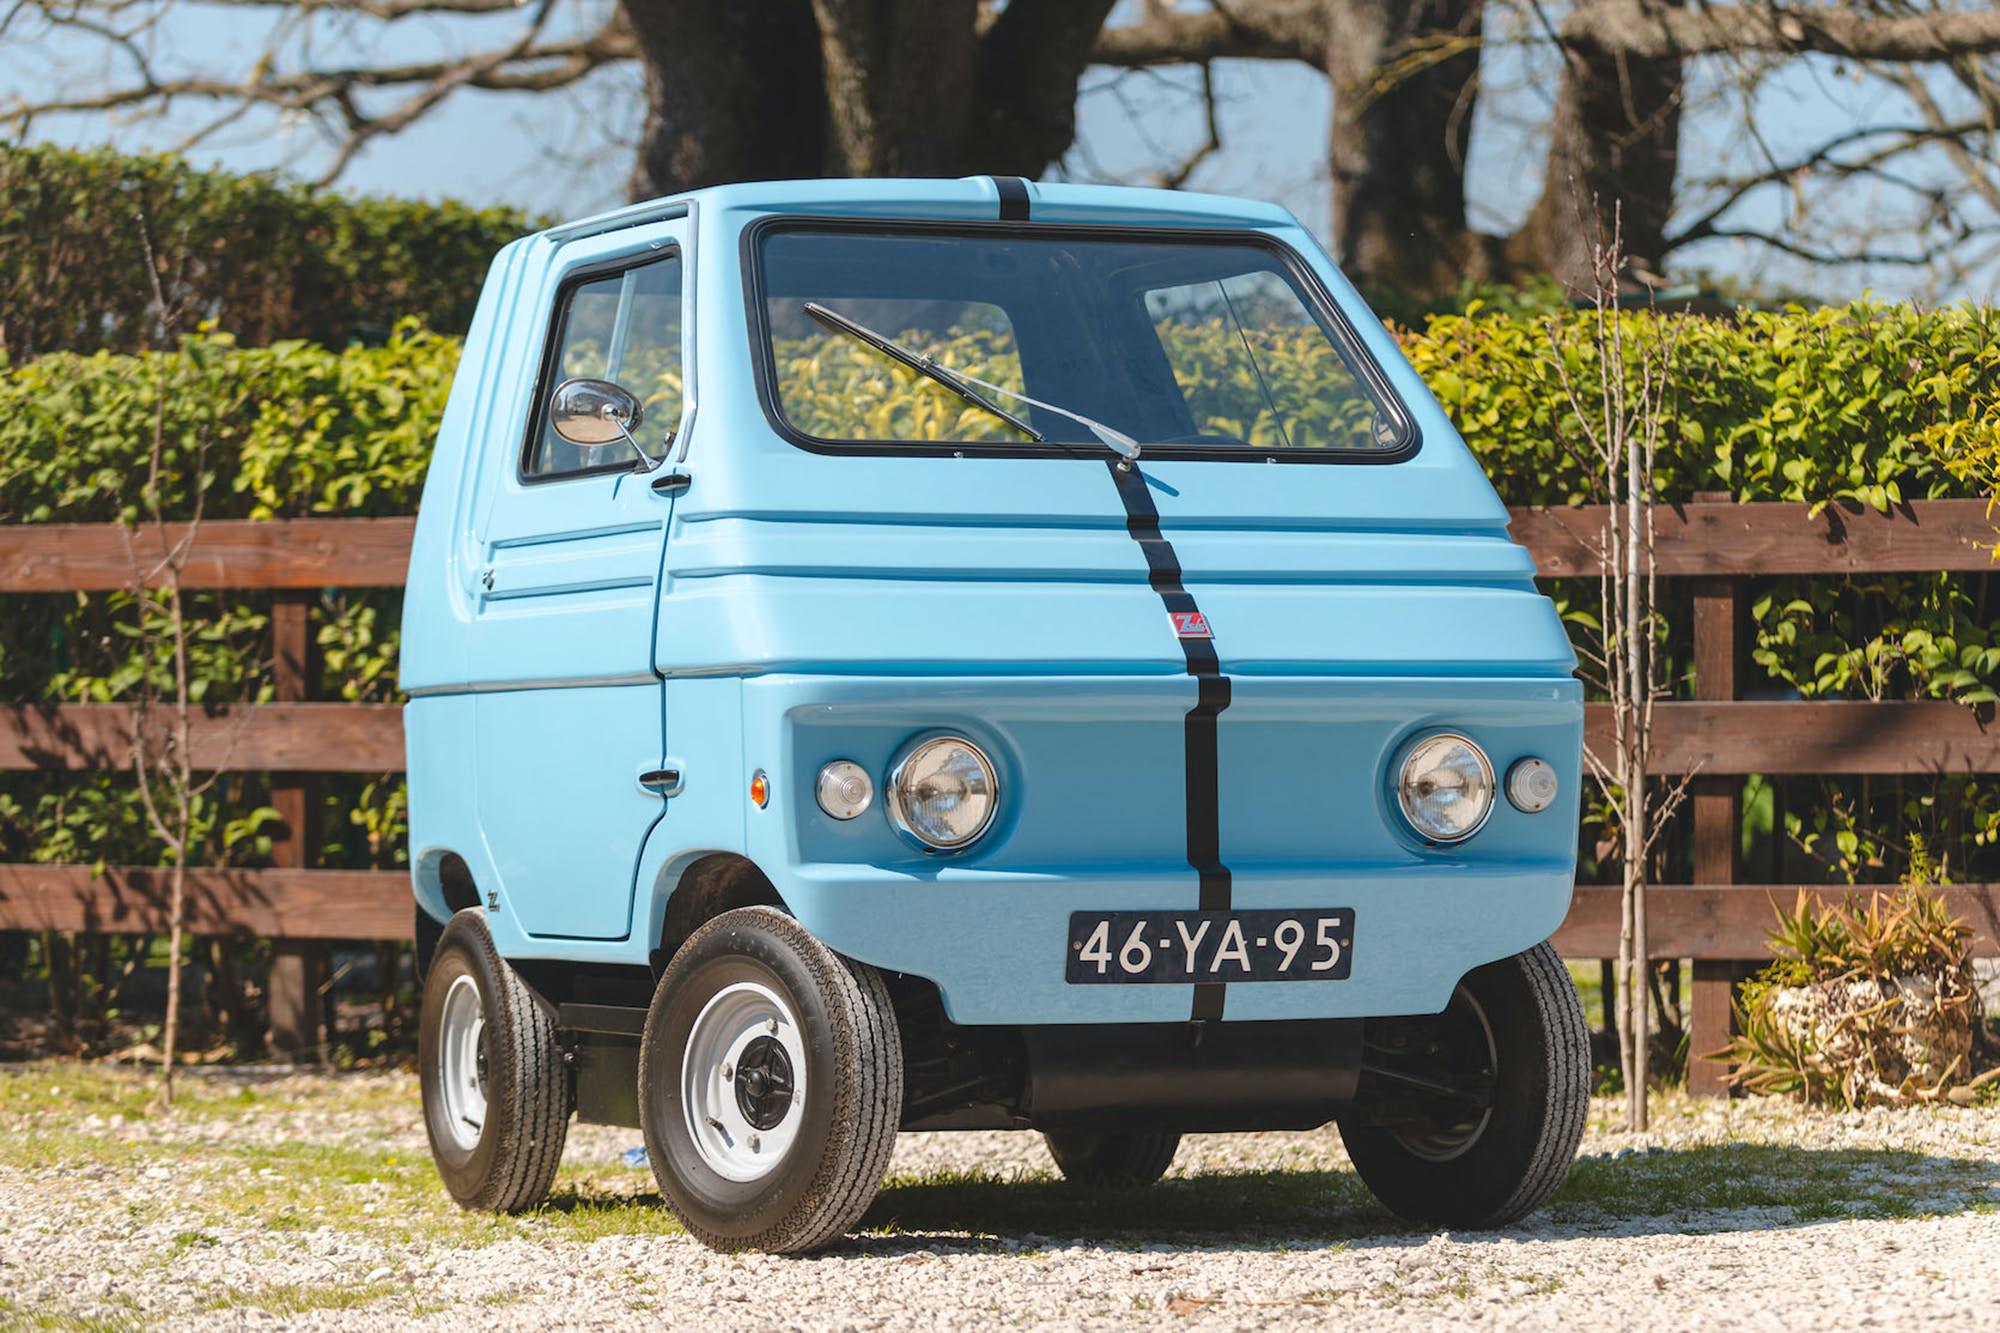 A Quirky Electric Car From The 1970s